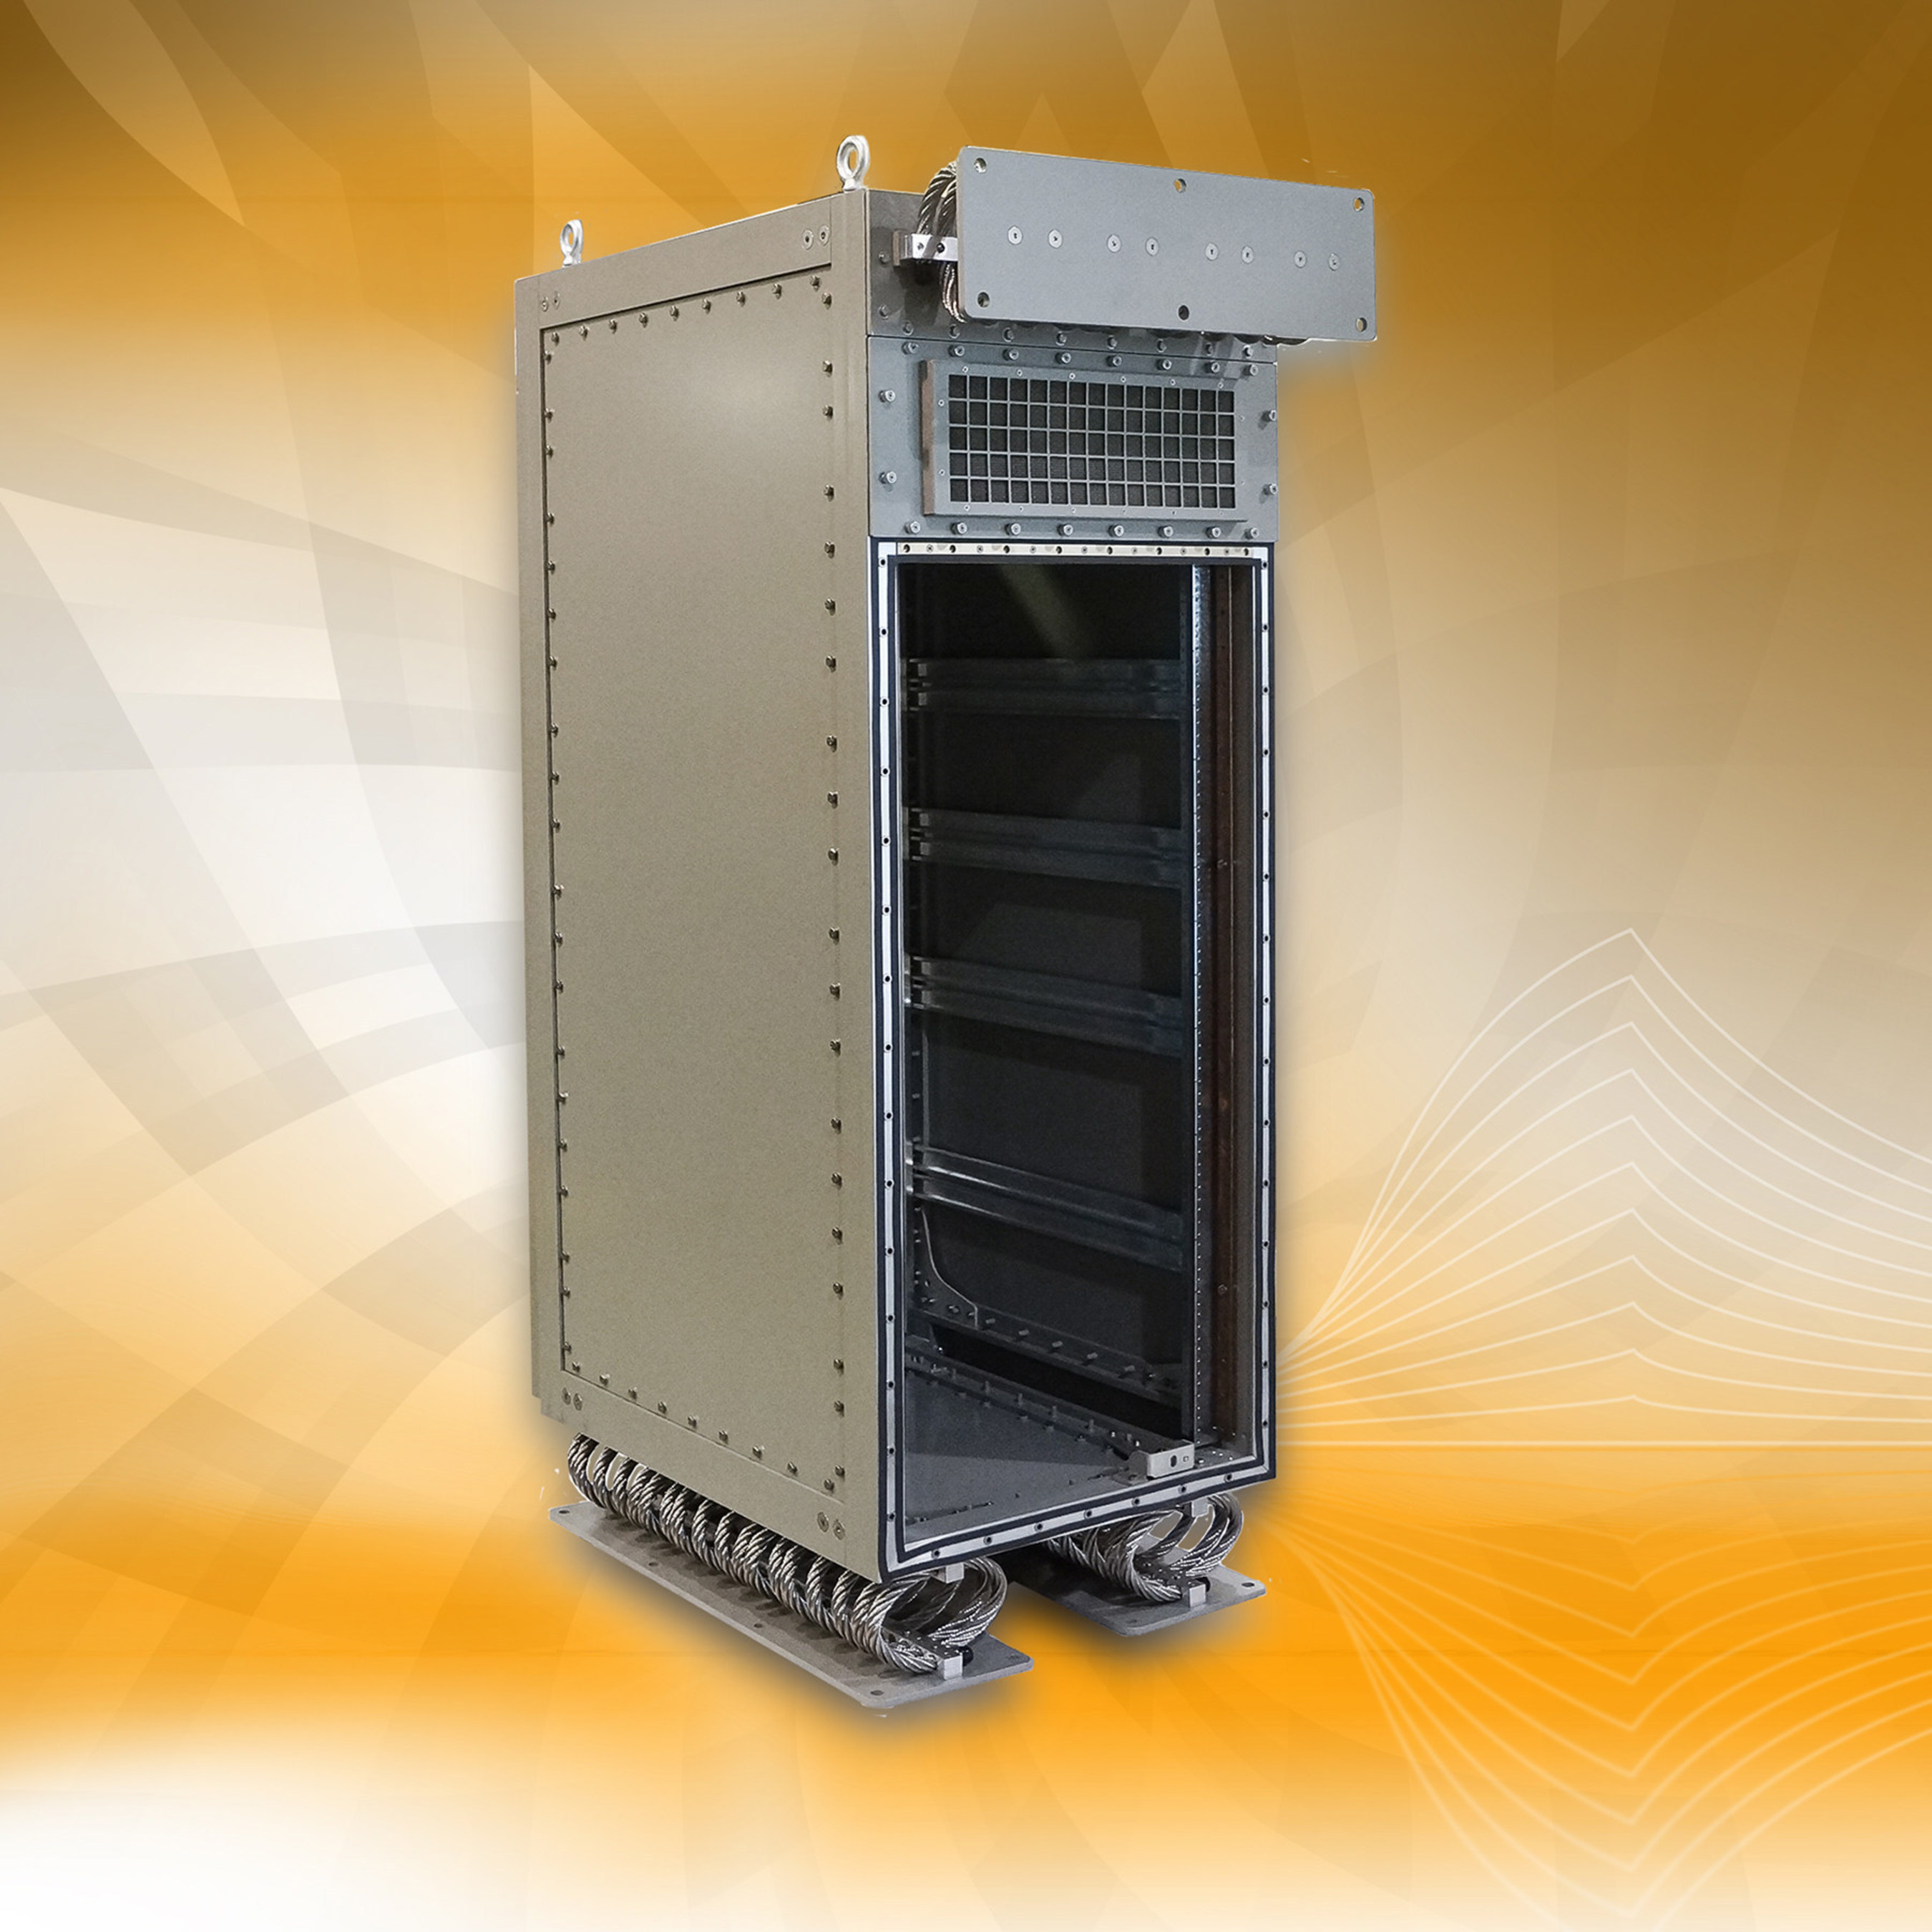 Weld-Free, Rugged Cabinet from Optima Offers Longer Structural Integrity. (PRNewsFoto/Elma Electronic Inc.)